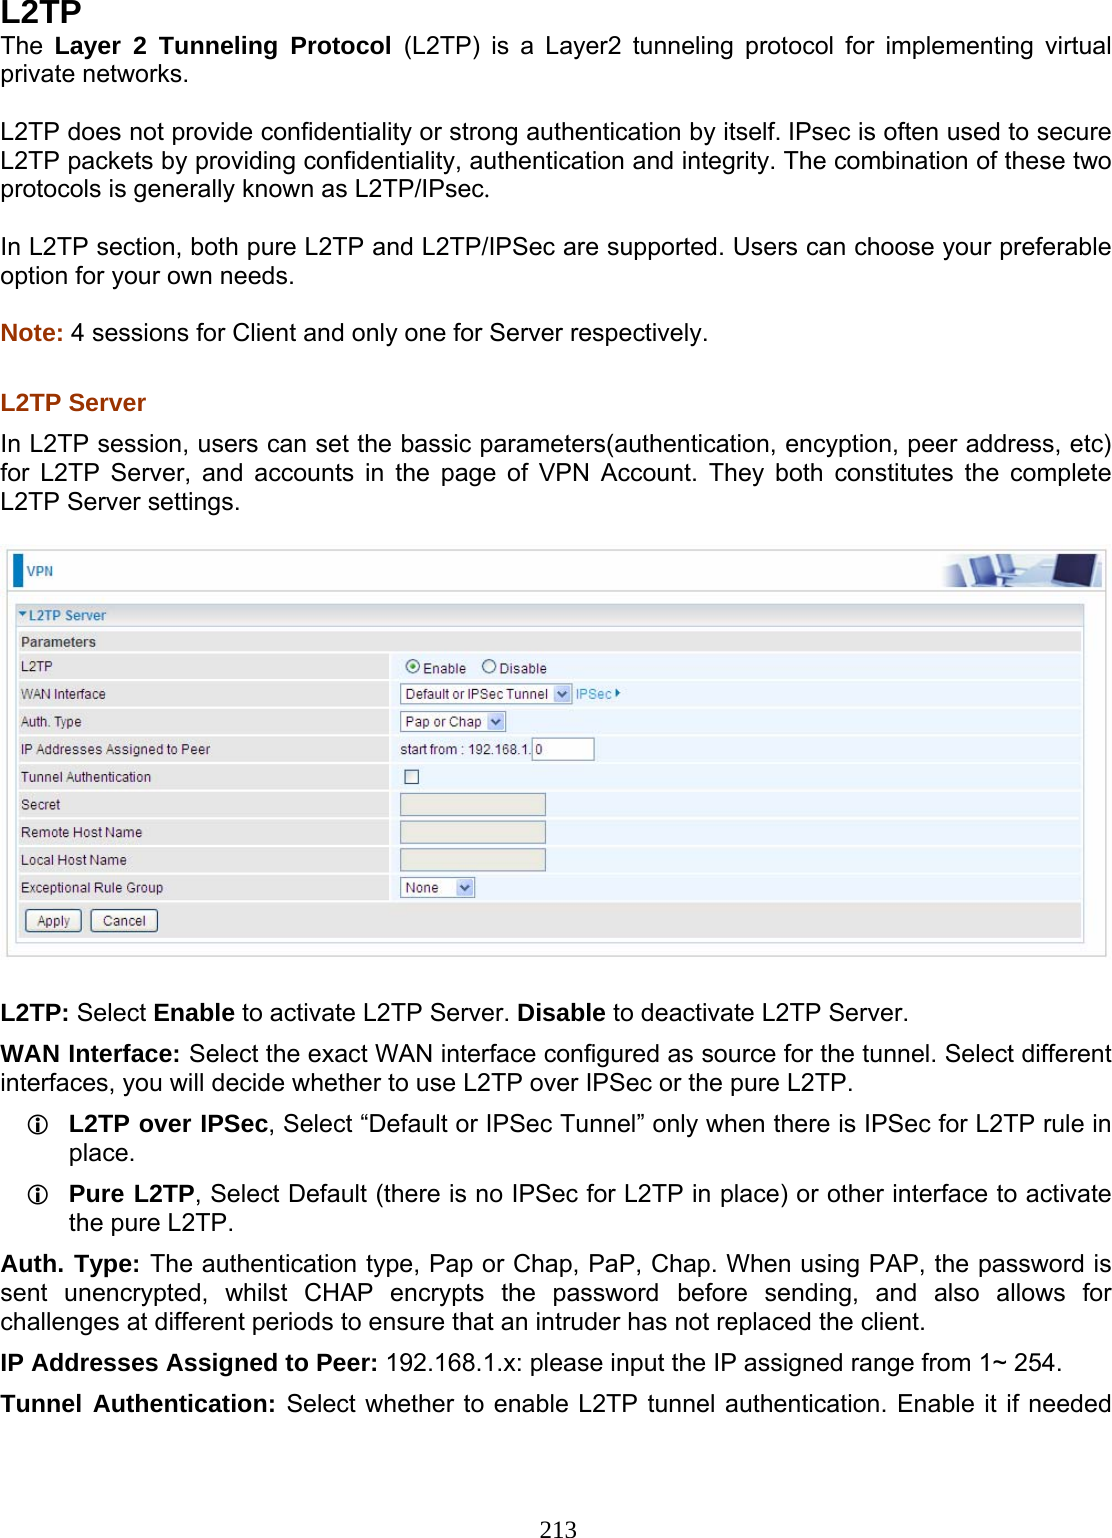 213 L2TP The  Layer 2 Tunneling Protocol (L2TP) is a Layer2 tunneling protocol for implementing virtual private networks.   L2TP does not provide confidentiality or strong authentication by itself. IPsec is often used to secure L2TP packets by providing confidentiality, authentication and integrity. The combination of these two protocols is generally known as L2TP/IPsec.   In L2TP section, both pure L2TP and L2TP/IPSec are supported. Users can choose your preferable option for your own needs.  Note: 4 sessions for Client and only one for Server respectively.   L2TP Server  In L2TP session, users can set the bassic parameters(authentication, encyption, peer address, etc) for L2TP Server, and accounts in the page of VPN Account. They both constitutes the complete L2TP Server settings.    L2TP: Select Enable to activate L2TP Server. Disable to deactivate L2TP Server. WAN Interface: Select the exact WAN interface configured as source for the tunnel. Select different interfaces, you will decide whether to use L2TP over IPSec or the pure L2TP.  L2TP over IPSec, Select “Default or IPSec Tunnel” only when there is IPSec for L2TP rule in place.  Pure L2TP, Select Default (there is no IPSec for L2TP in place) or other interface to activate the pure L2TP. Auth. Type: The authentication type, Pap or Chap, PaP, Chap. When using PAP, the password is sent unencrypted, whilst CHAP encrypts the password before sending, and also allows for challenges at different periods to ensure that an intruder has not replaced the client. IP Addresses Assigned to Peer: 192.168.1.x: please input the IP assigned range from 1~ 254.  Tunnel Authentication: Select whether to enable L2TP tunnel authentication. Enable it if needed 